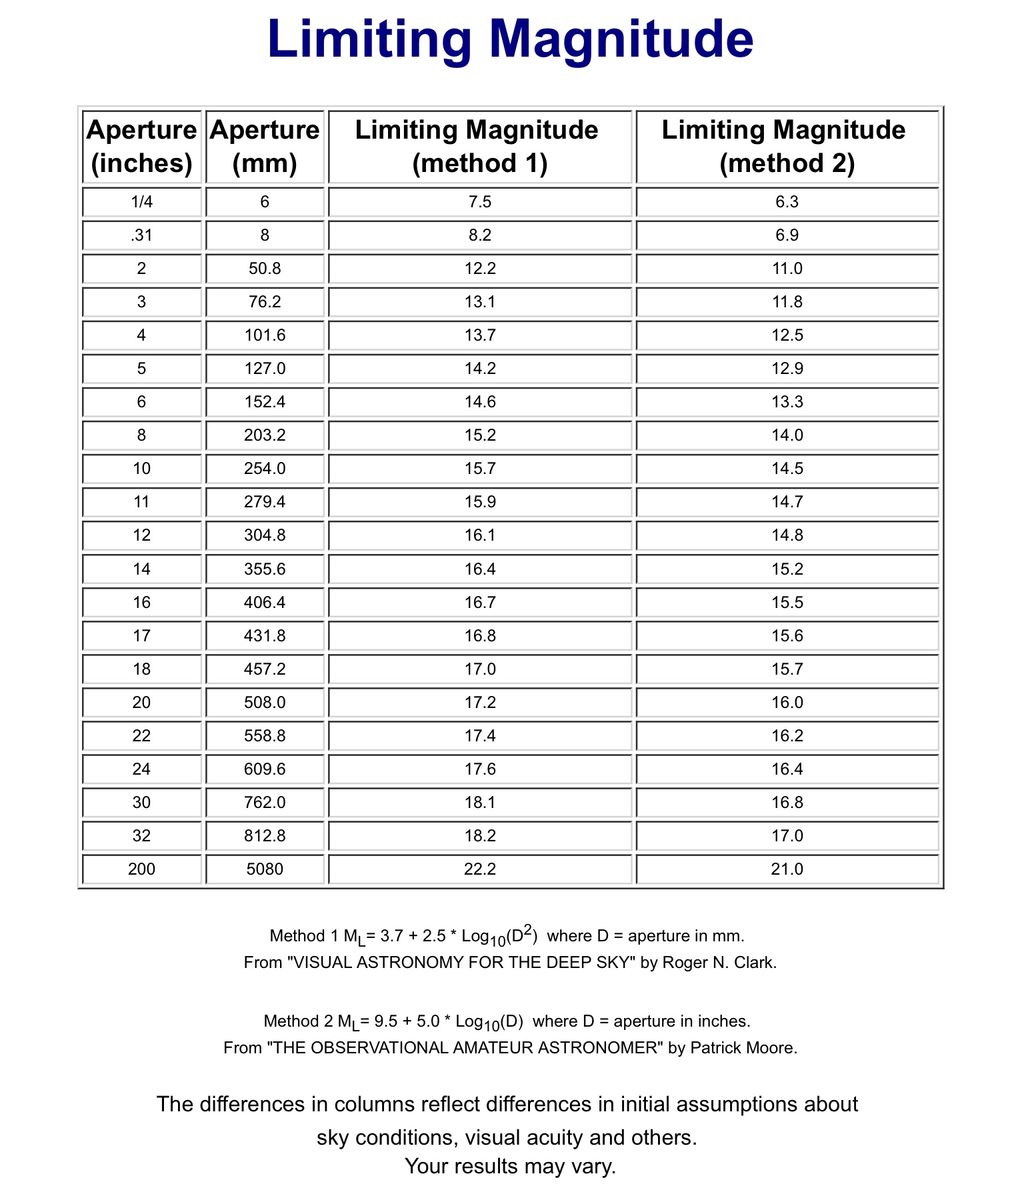 Aperture and Limiting Magnitude